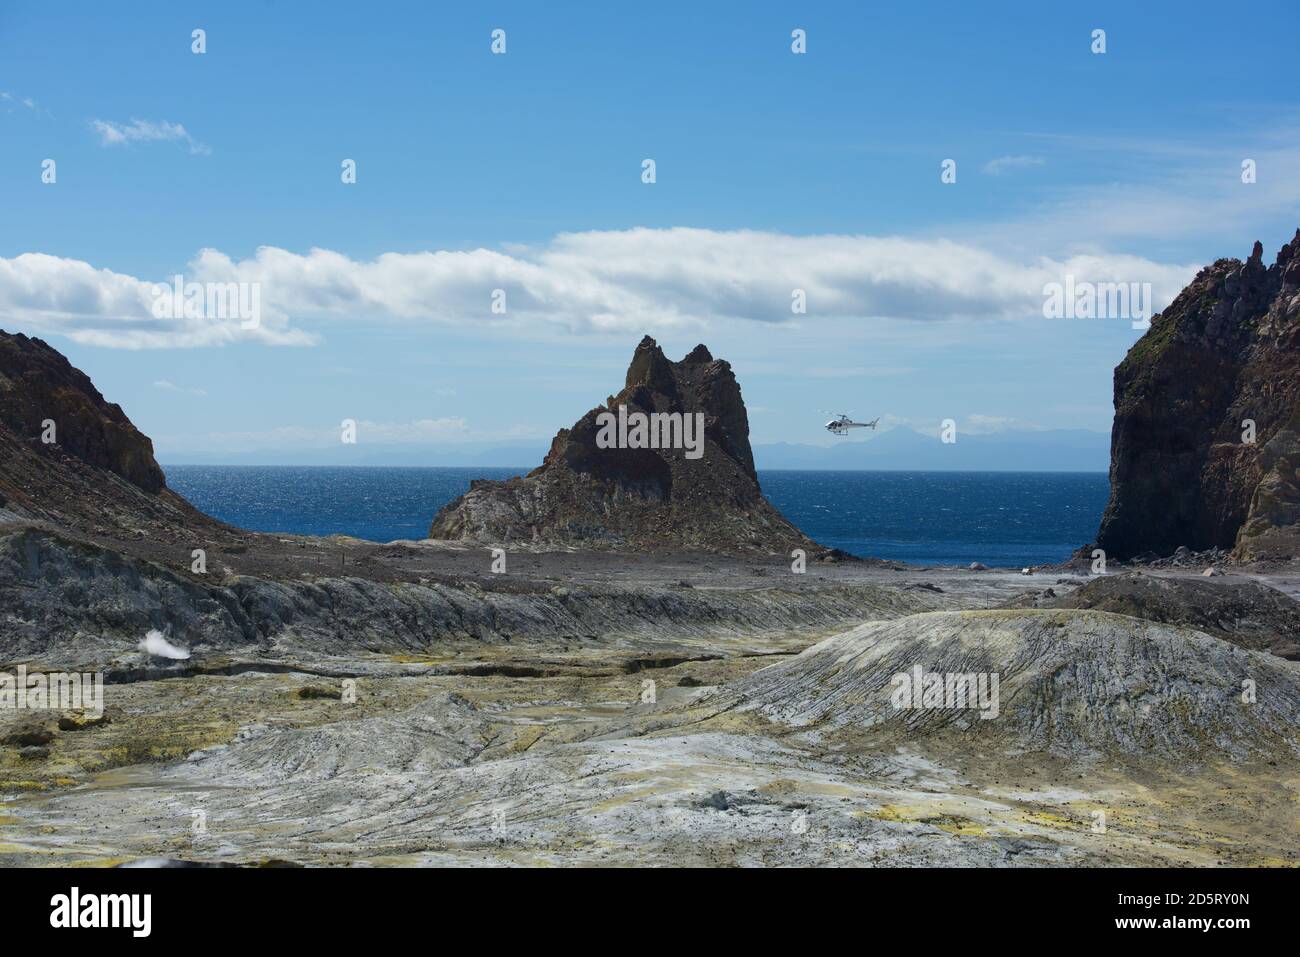 View to White Island (Whakaari)an active andesite stratovolcano,situated 48 km from the east coast of the North Island of New Zealand.Active volcano i Stock Photo